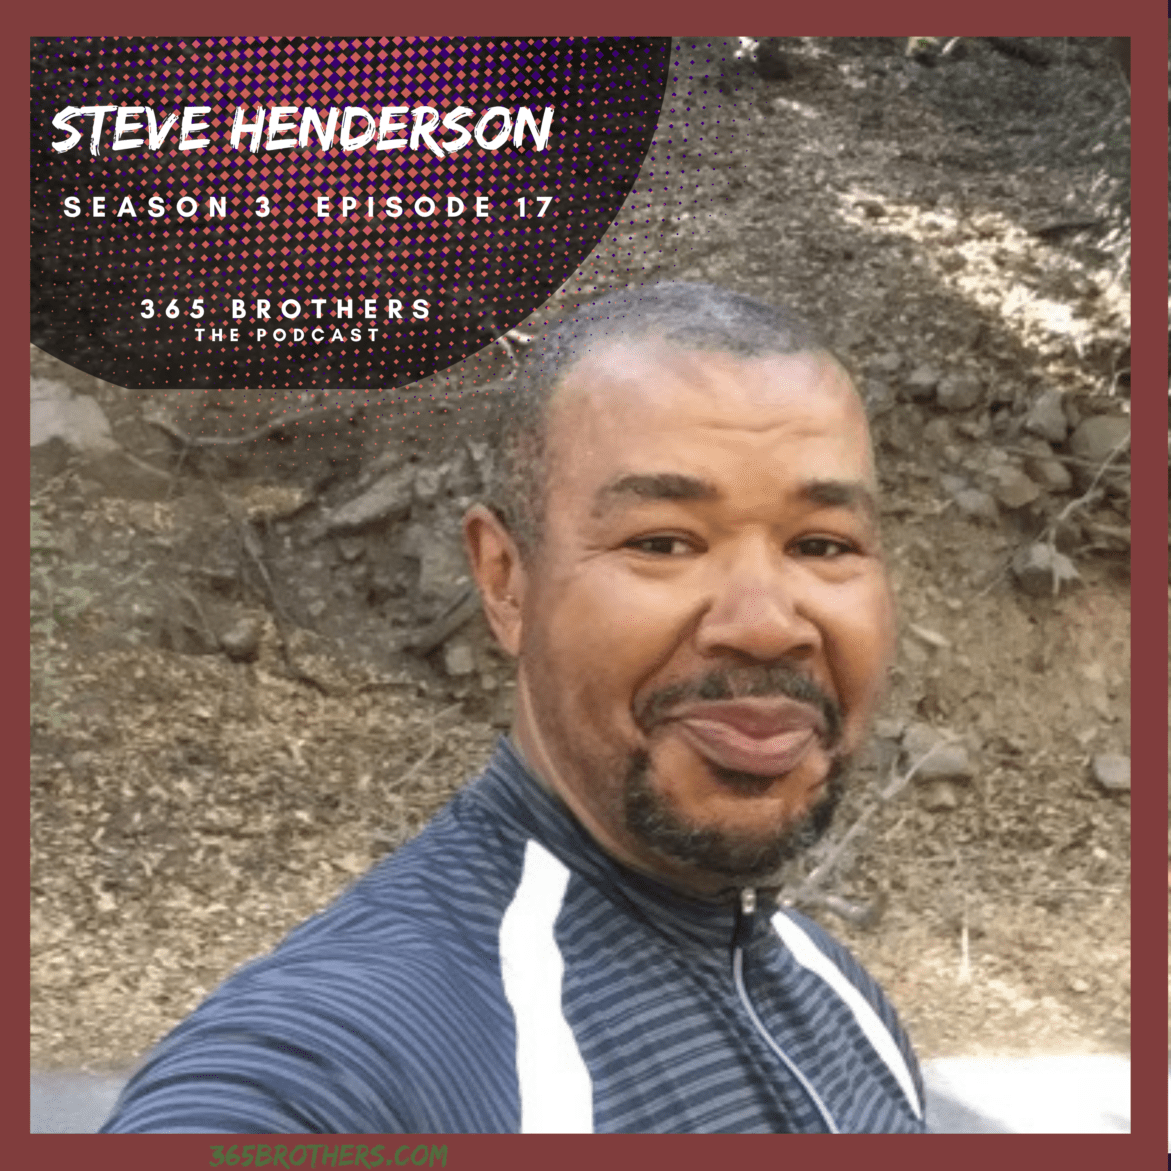 Black Podcasting - Civil Engineer Steve Henderson, Who Designs Highways and Train Systems, Shares What Propels Him